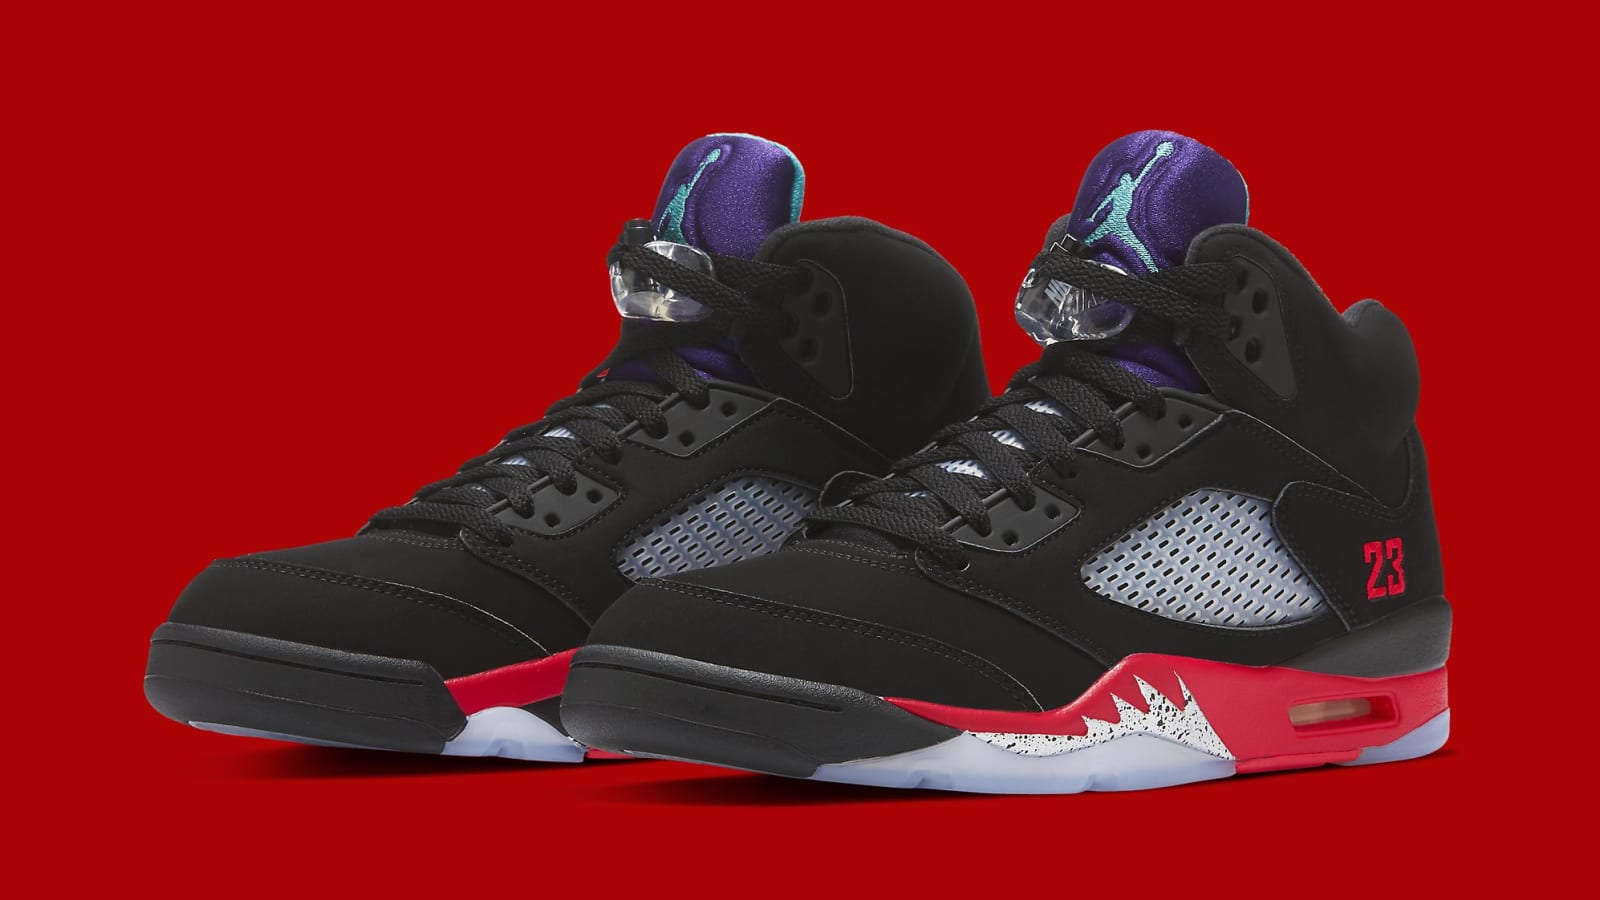 Air Jordan 5 &quot;Top 3&quot; Officially Revealed: Release Info